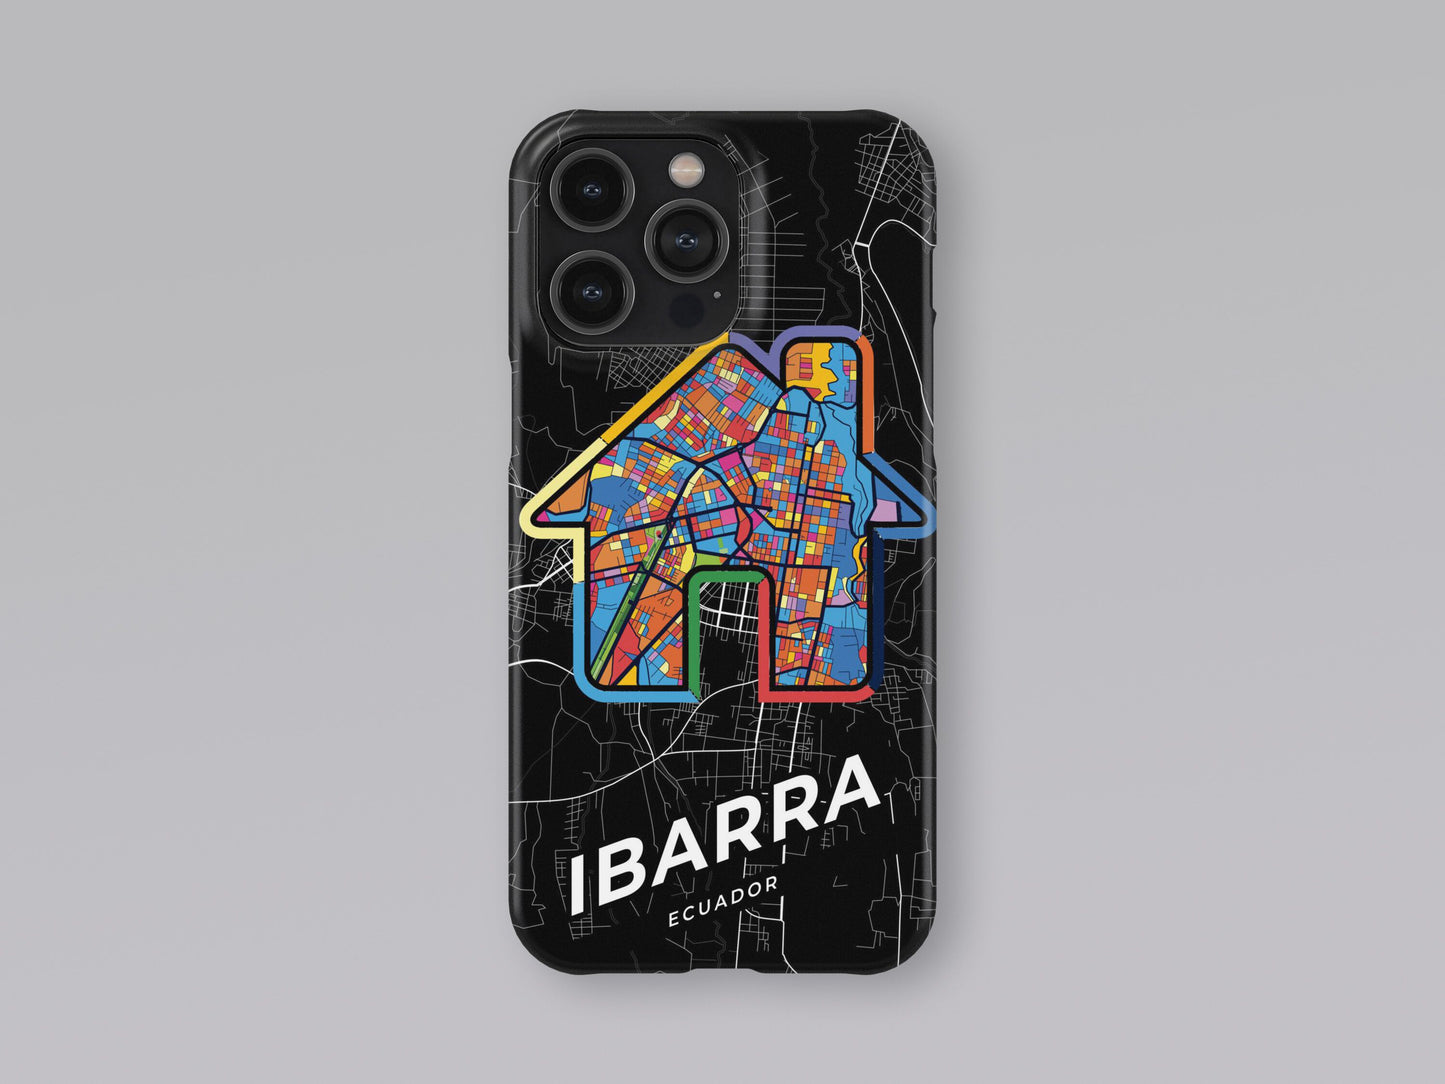 Ibarra Ecuador slim phone case with colorful icon. Birthday, wedding or housewarming gift. Couple match cases. 3